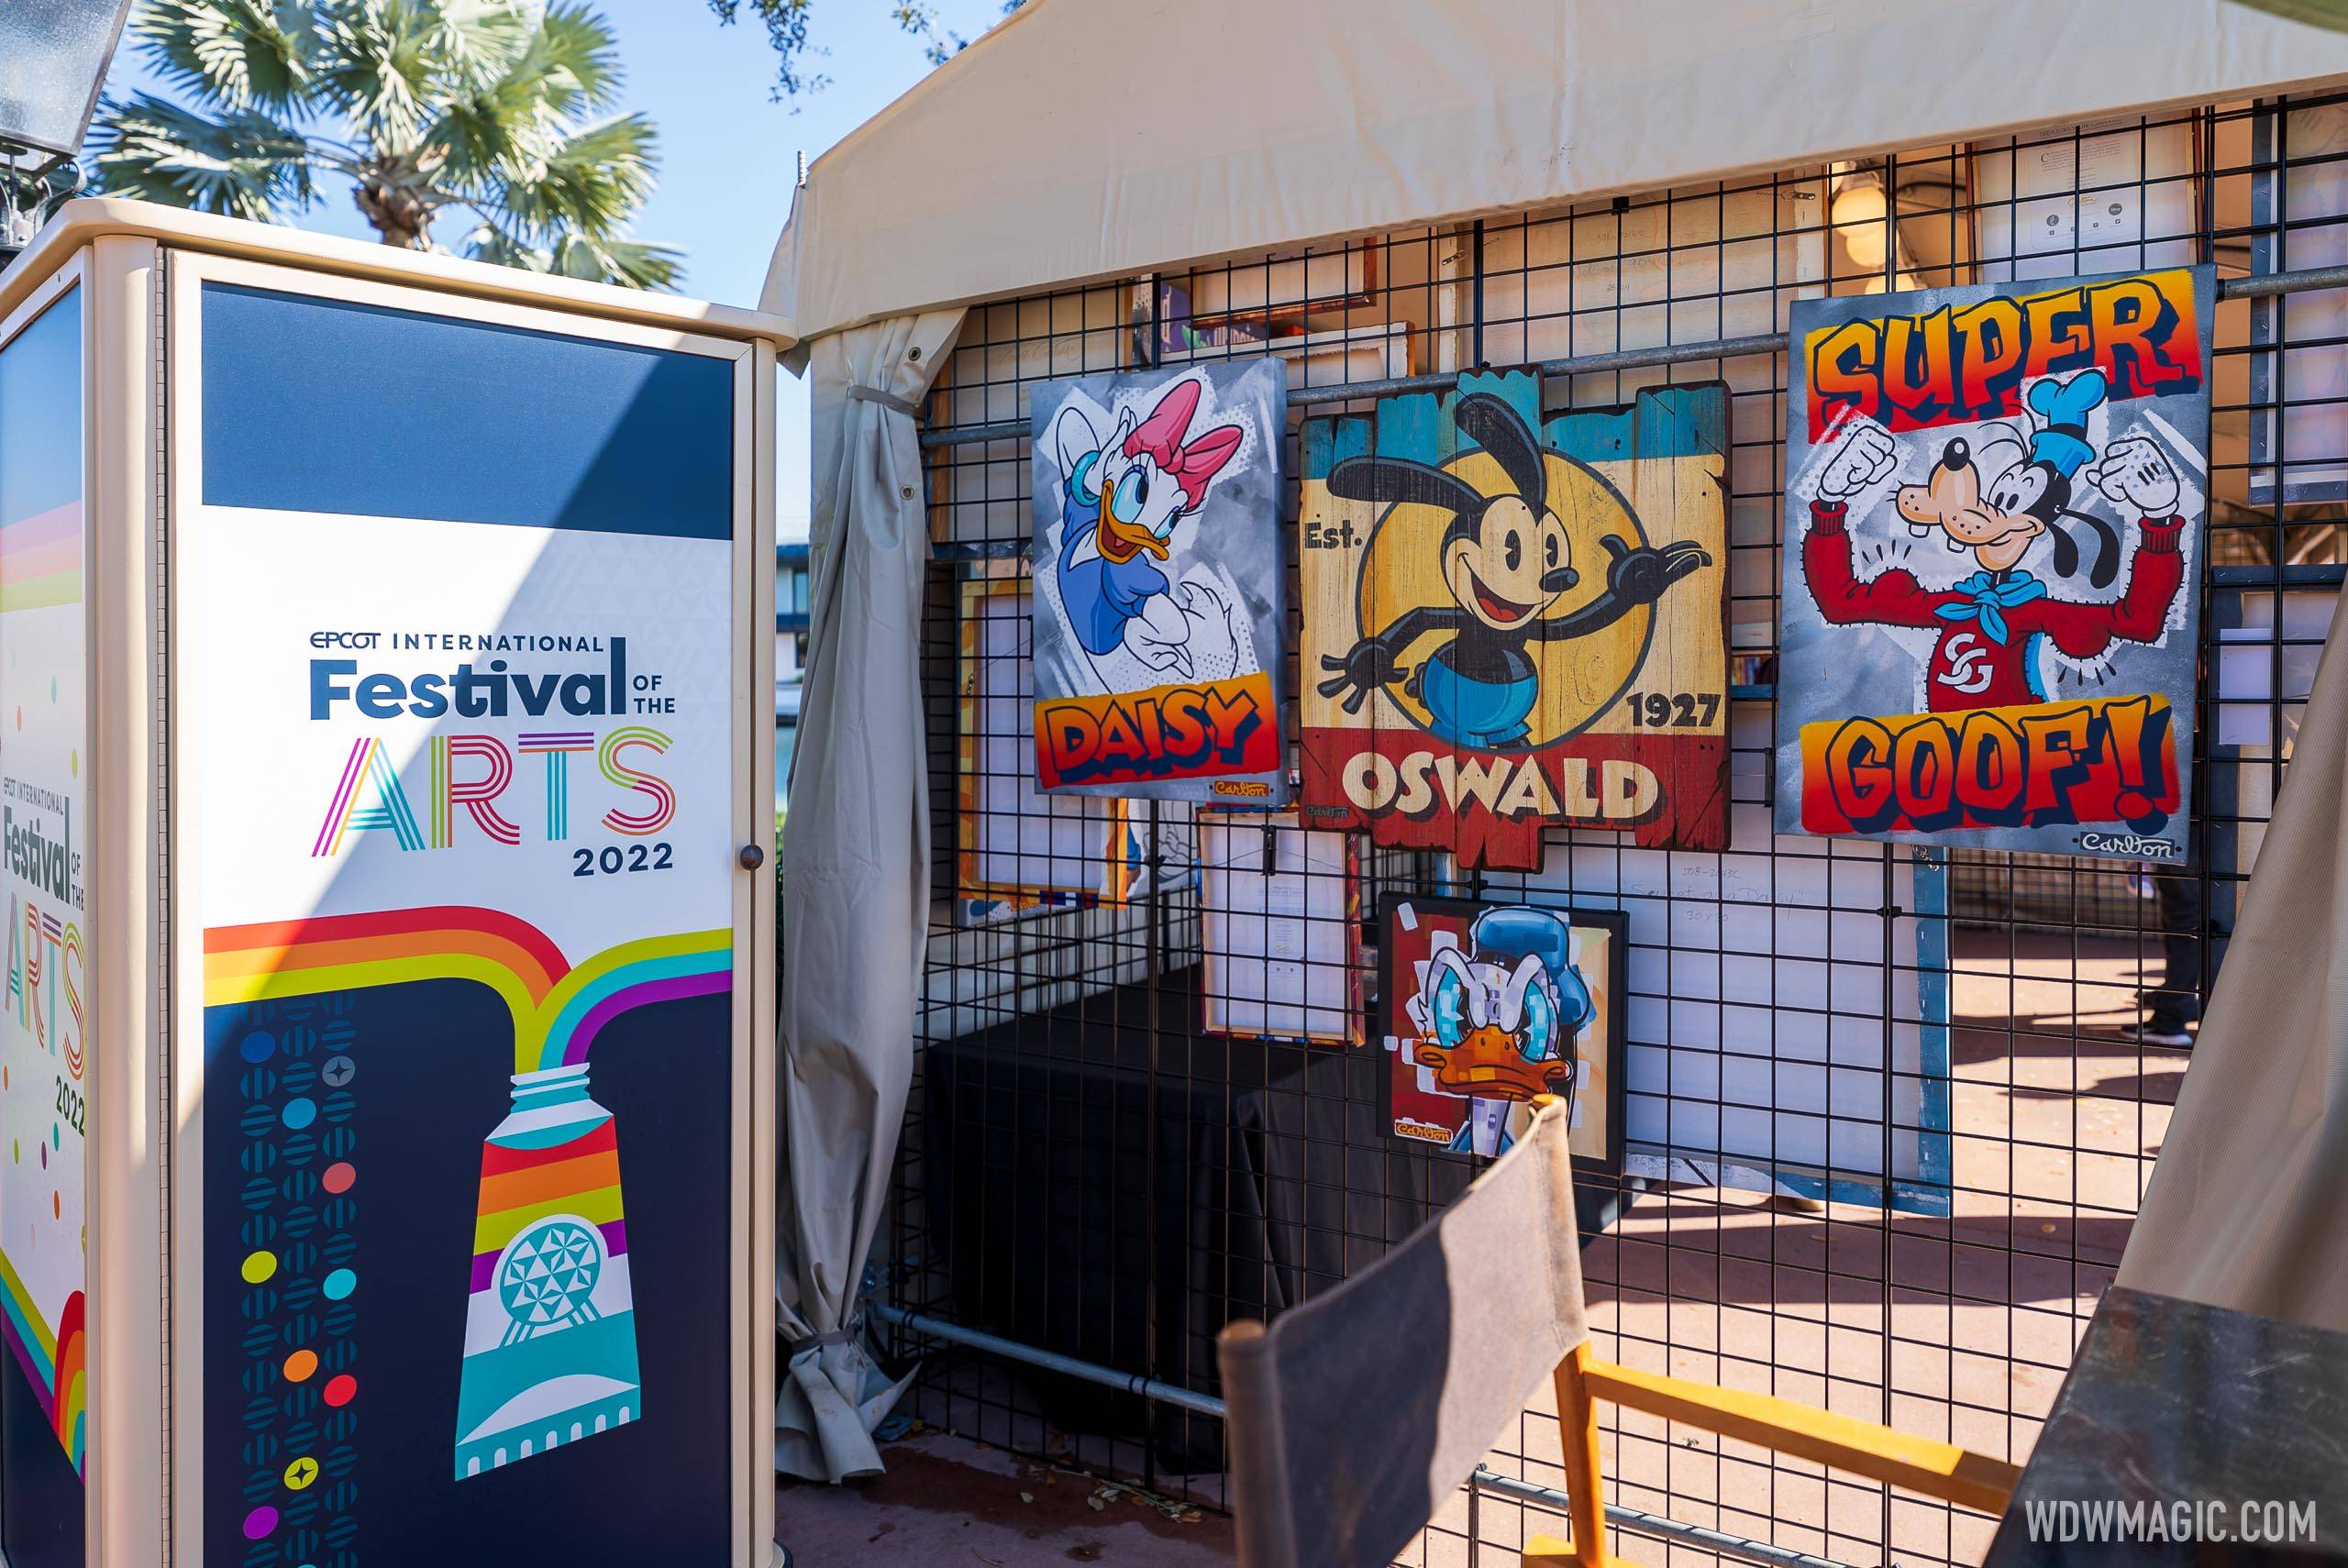 Complete line-up of Food Studio kiosks coming to the 2023 EPCOT International Festival of the Arts at Walt Disney World